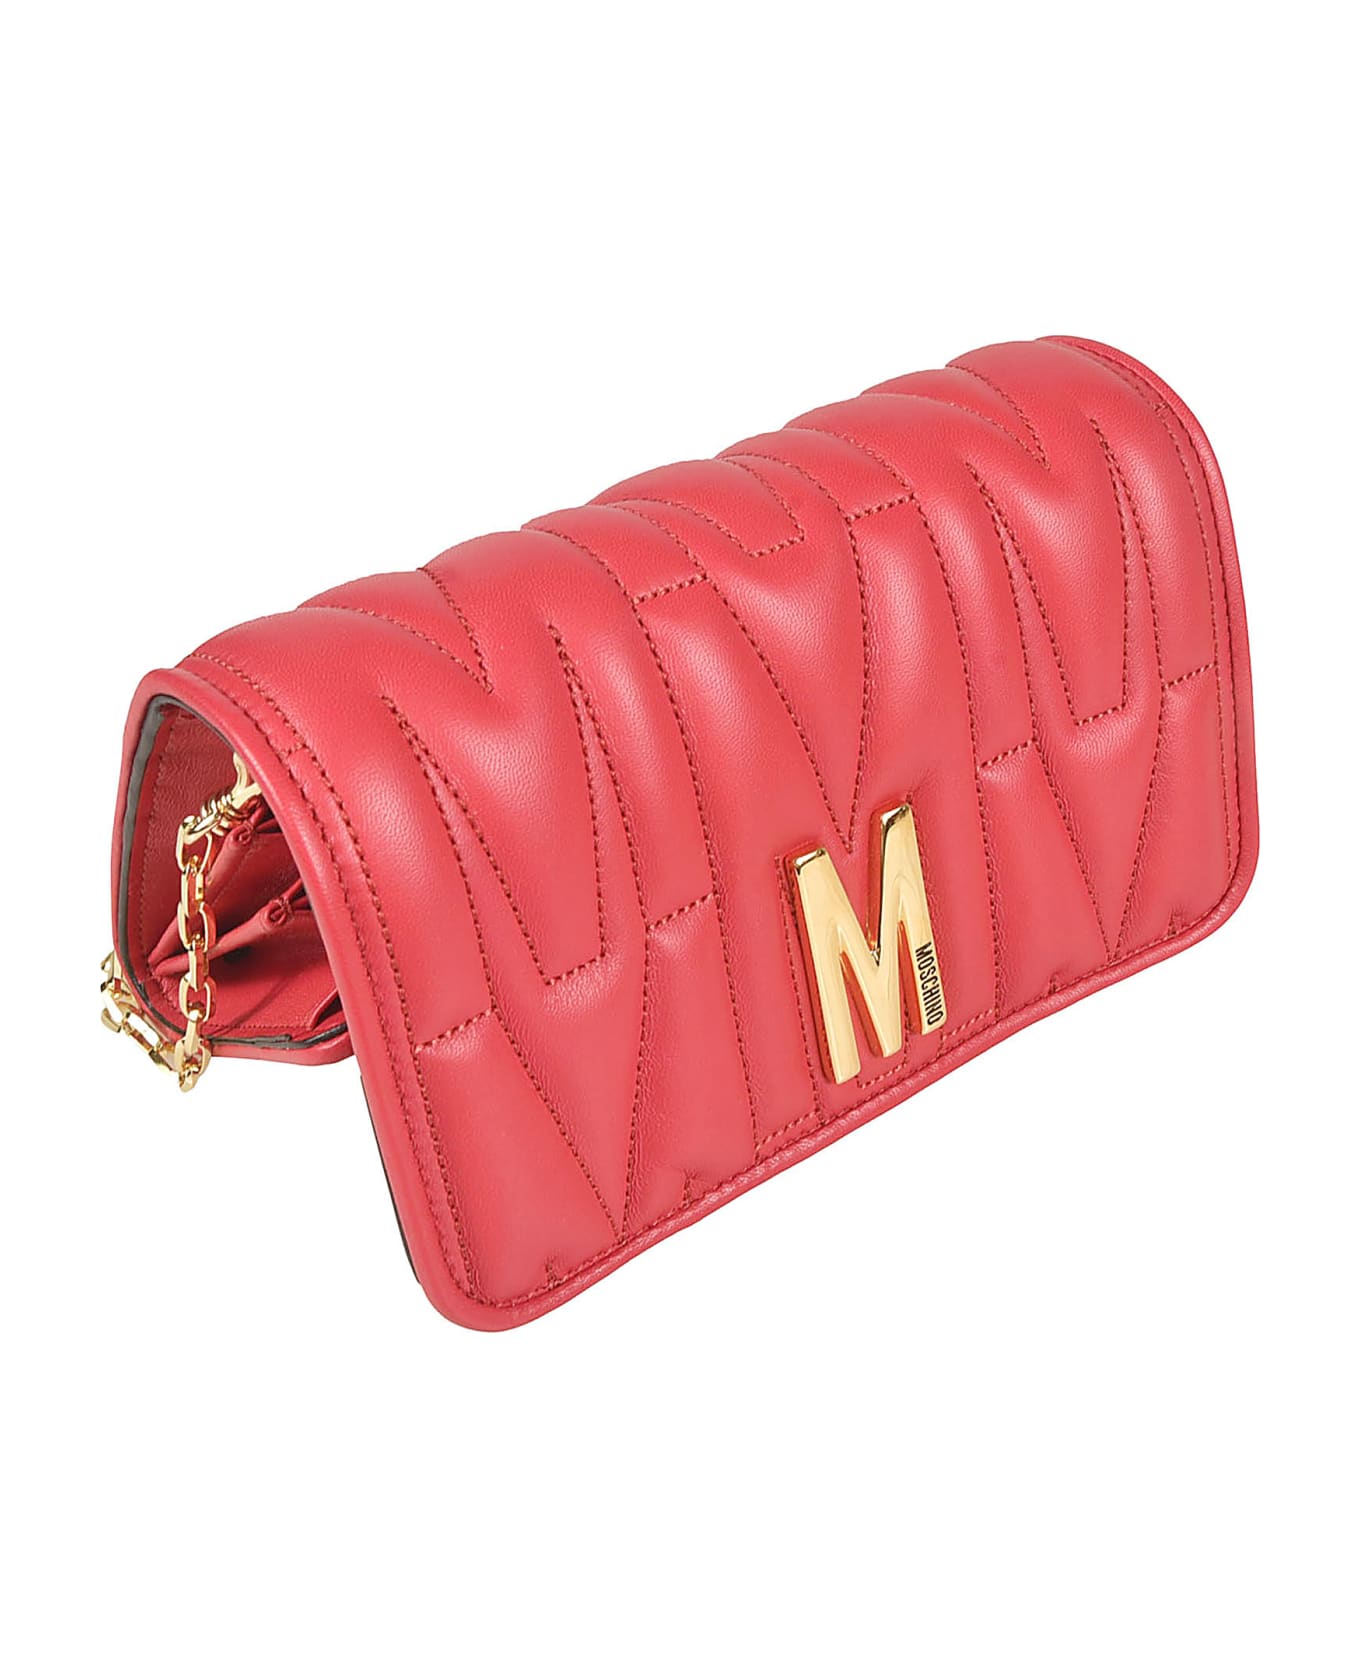 Moschino M Plaque Quilted Flap Chain Shoulder Bag - Red